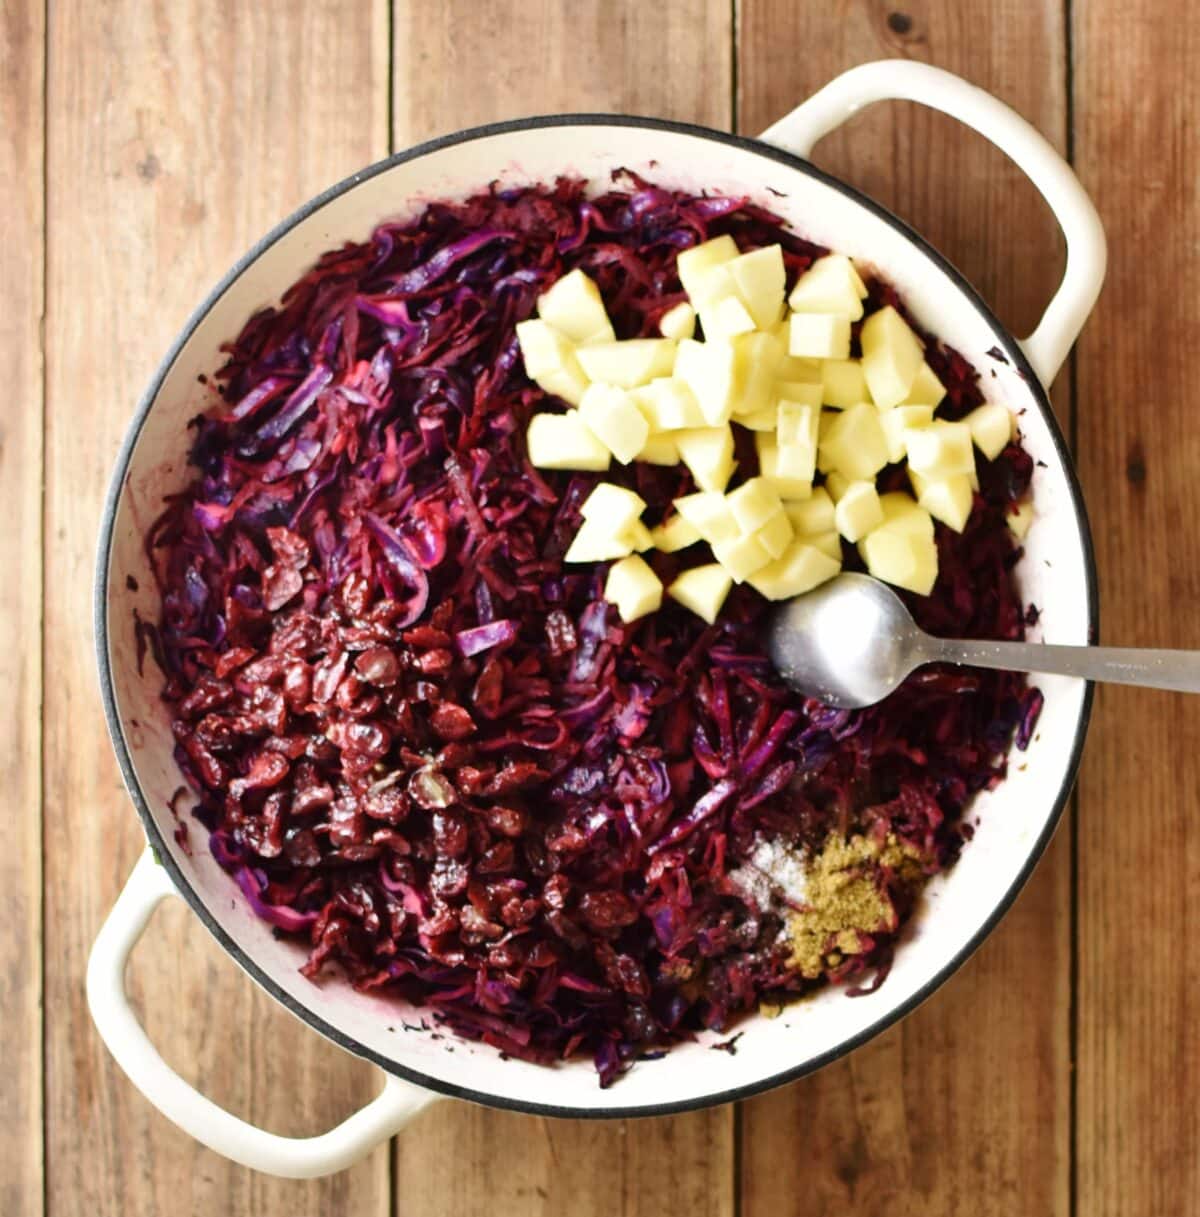 Shredded red cabbage, spices and cubed apple in large white pan with spoon.